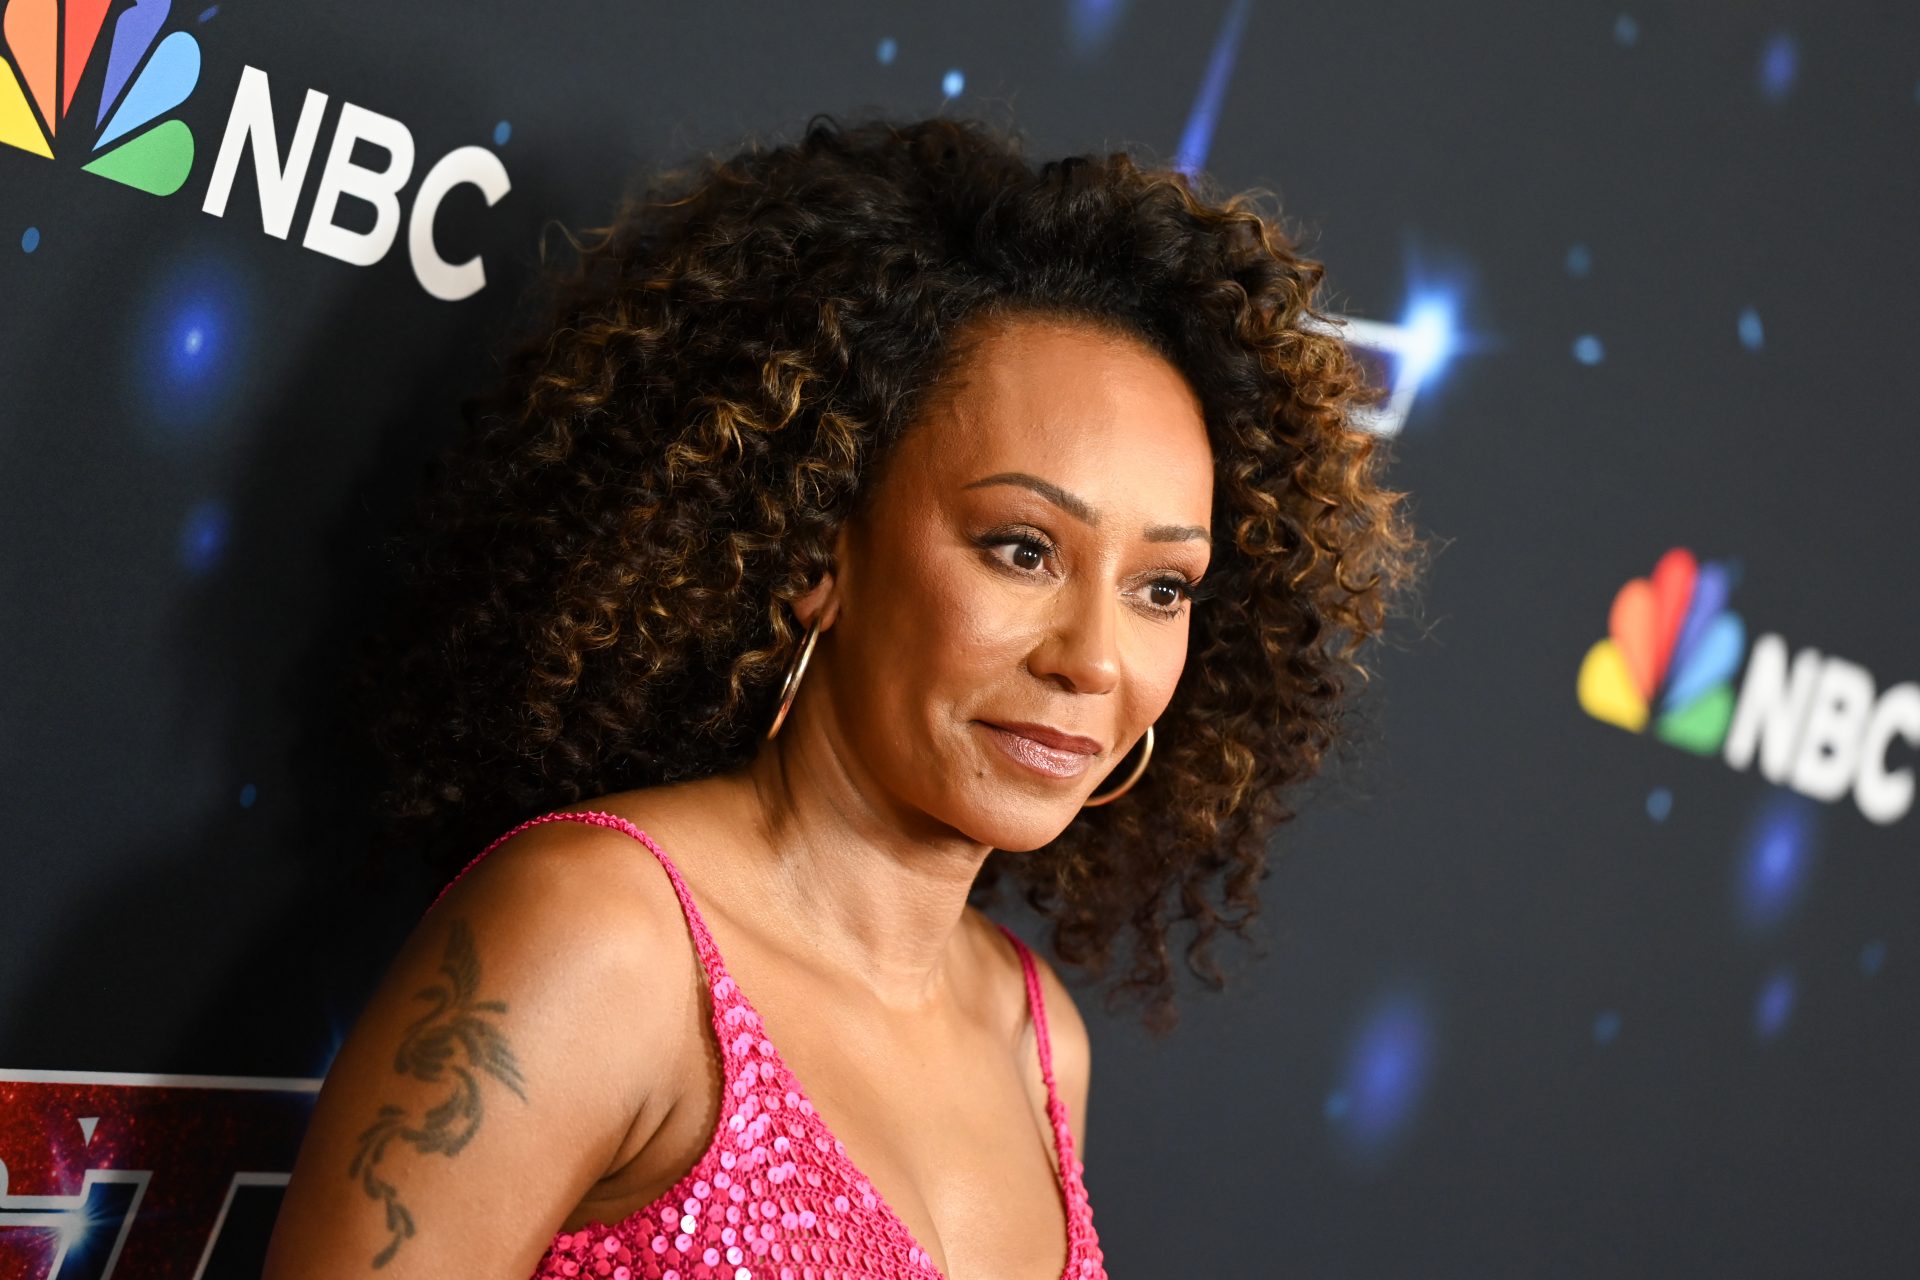 Mel B's horror stories about her marriage